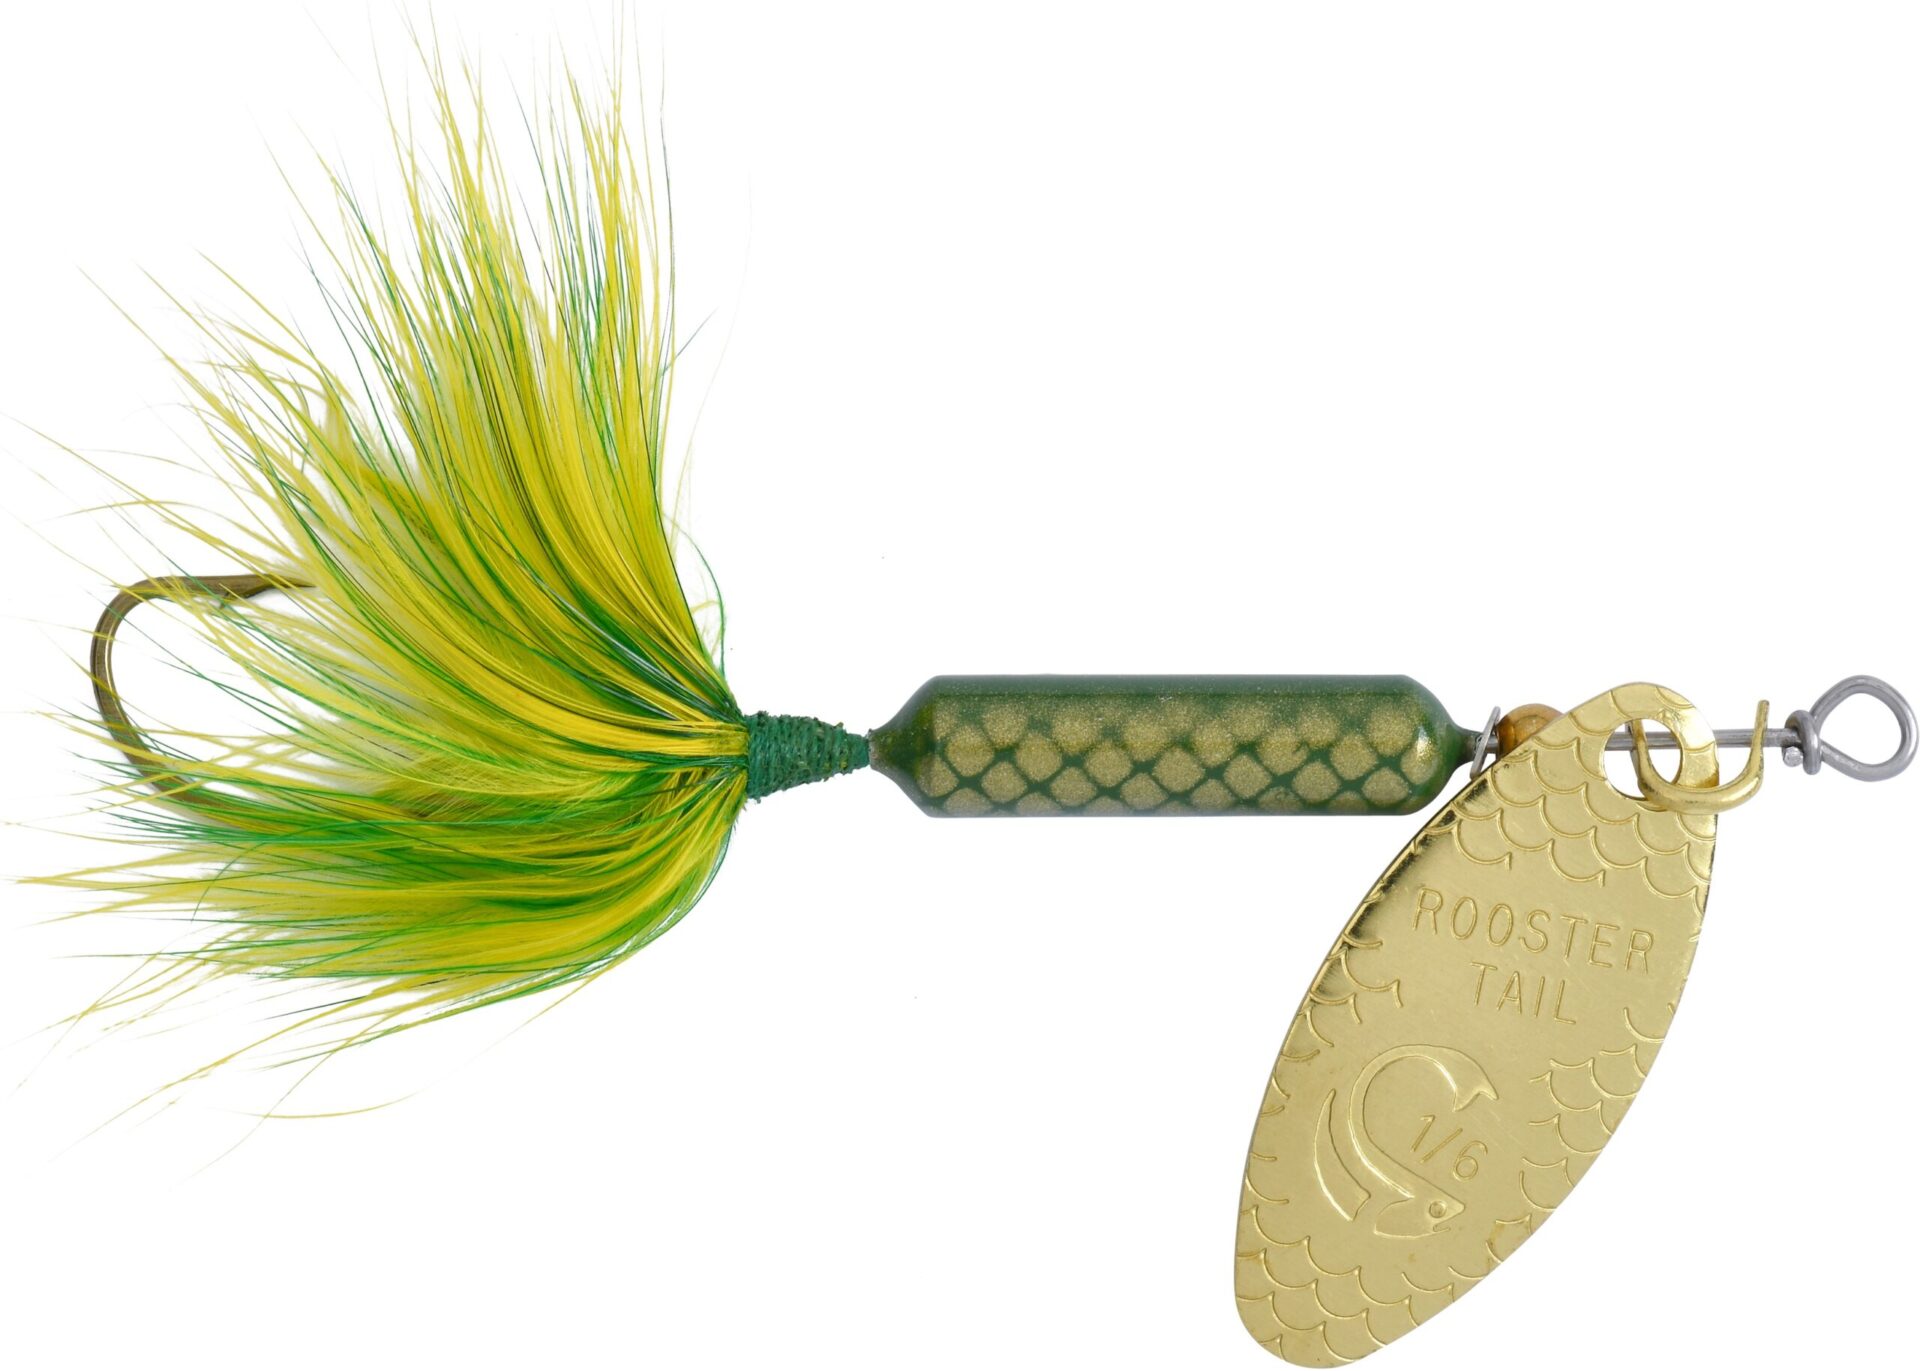 Rooster tail : r/Fishing_Gear